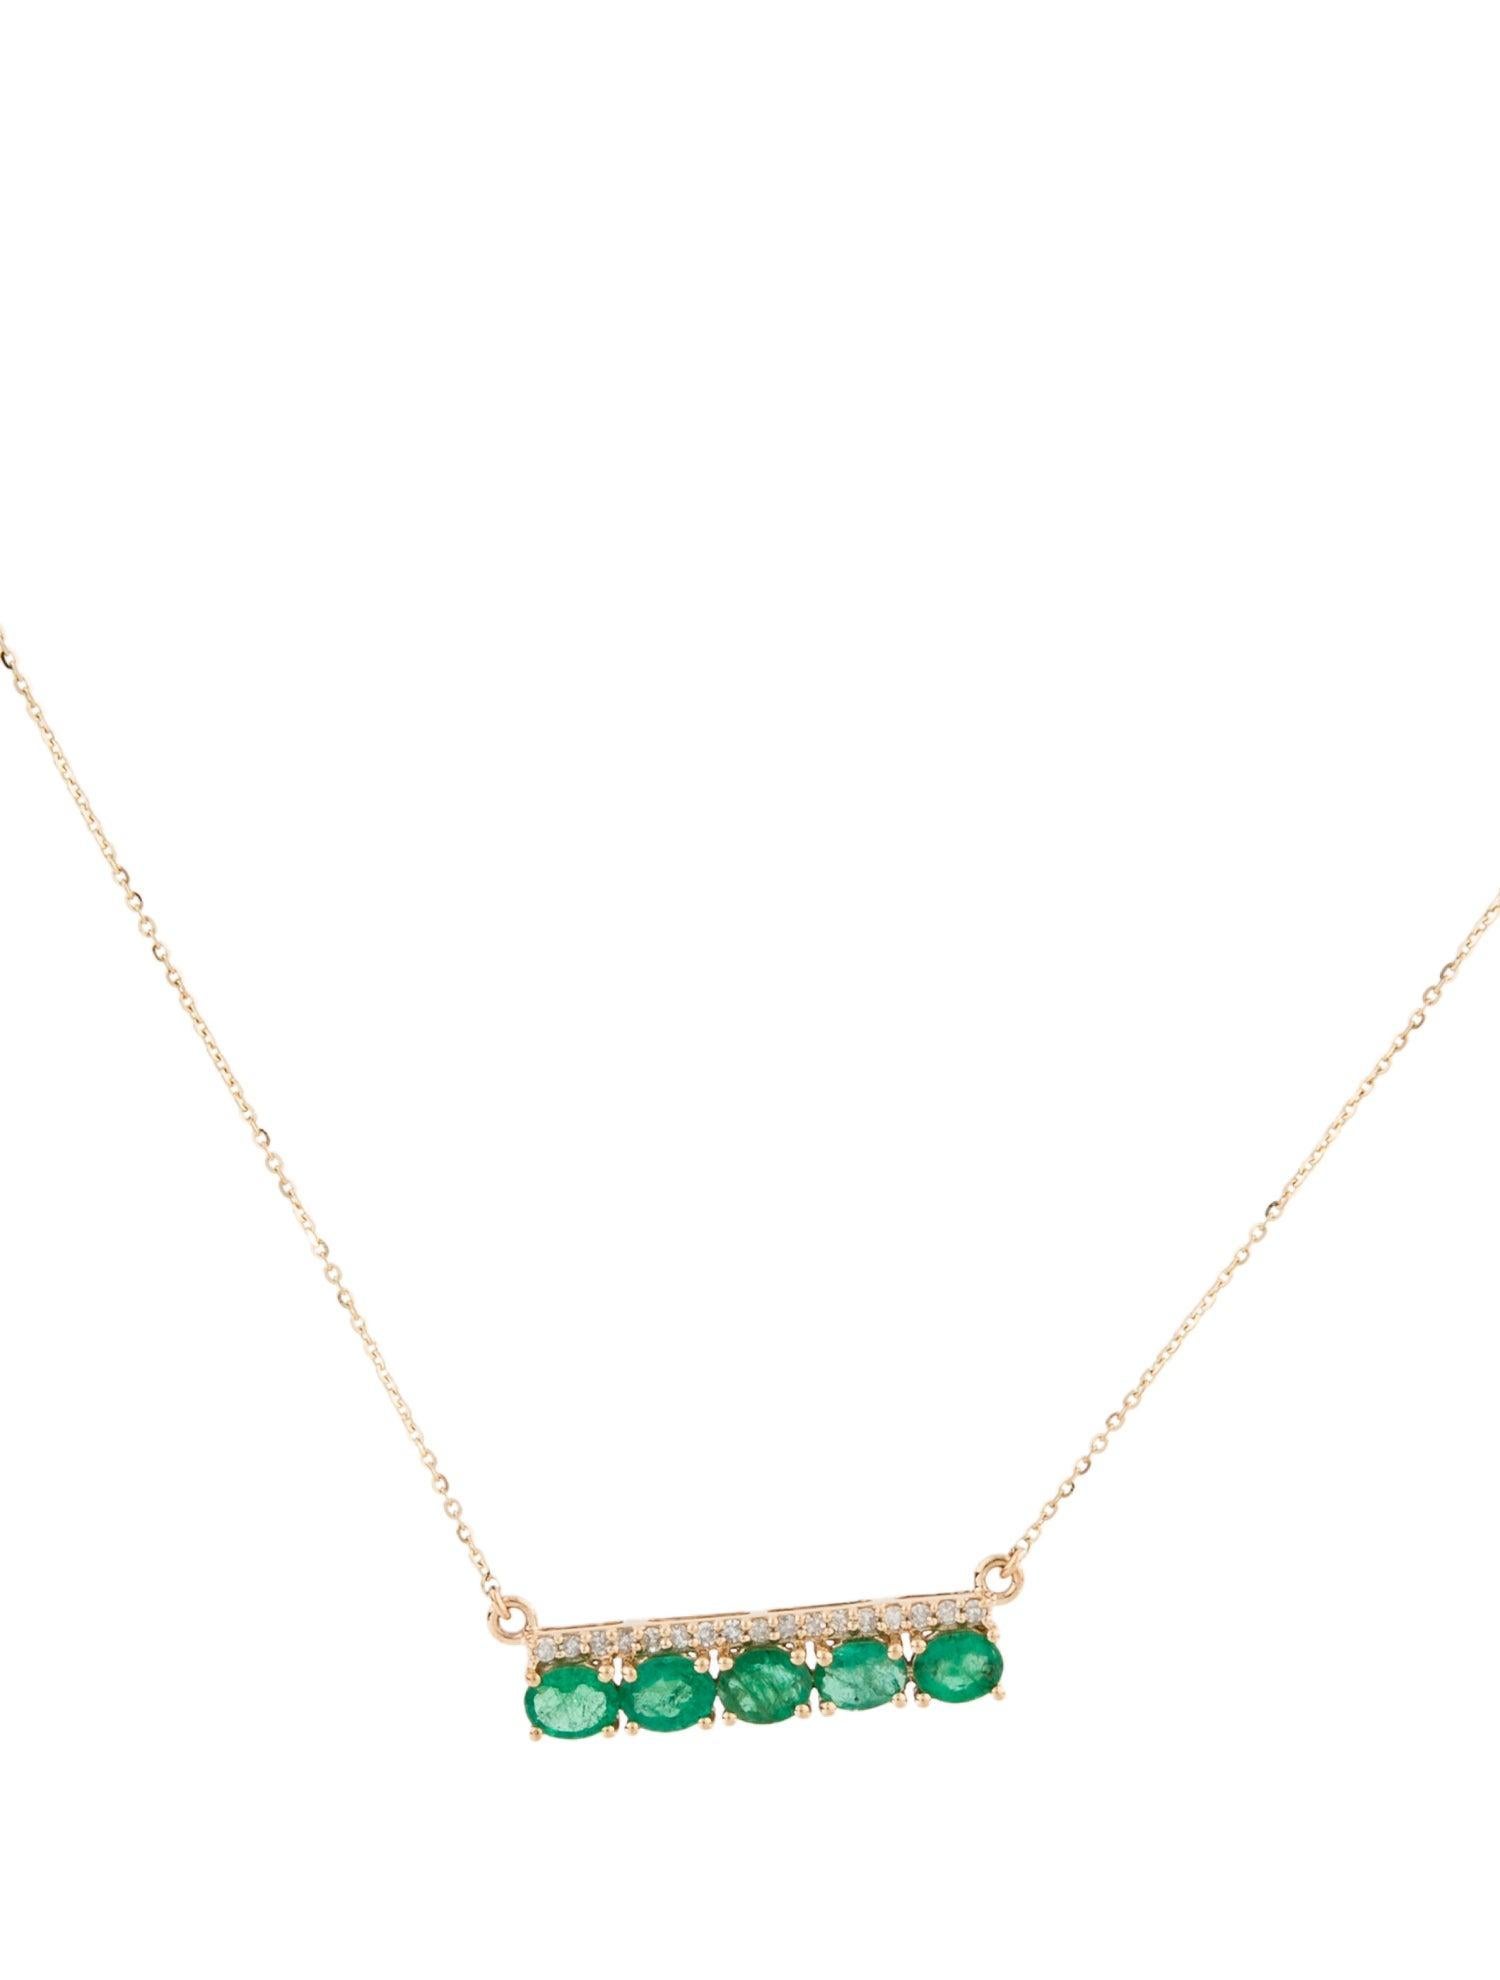 Immerse yourself in the enchanting allure of nature with our Forest Ferns collection, epitomized by the breathtaking beauty of this Emerald and Diamond Pendant. Inspired by the verdant forests that blanket the world, this collection captures the